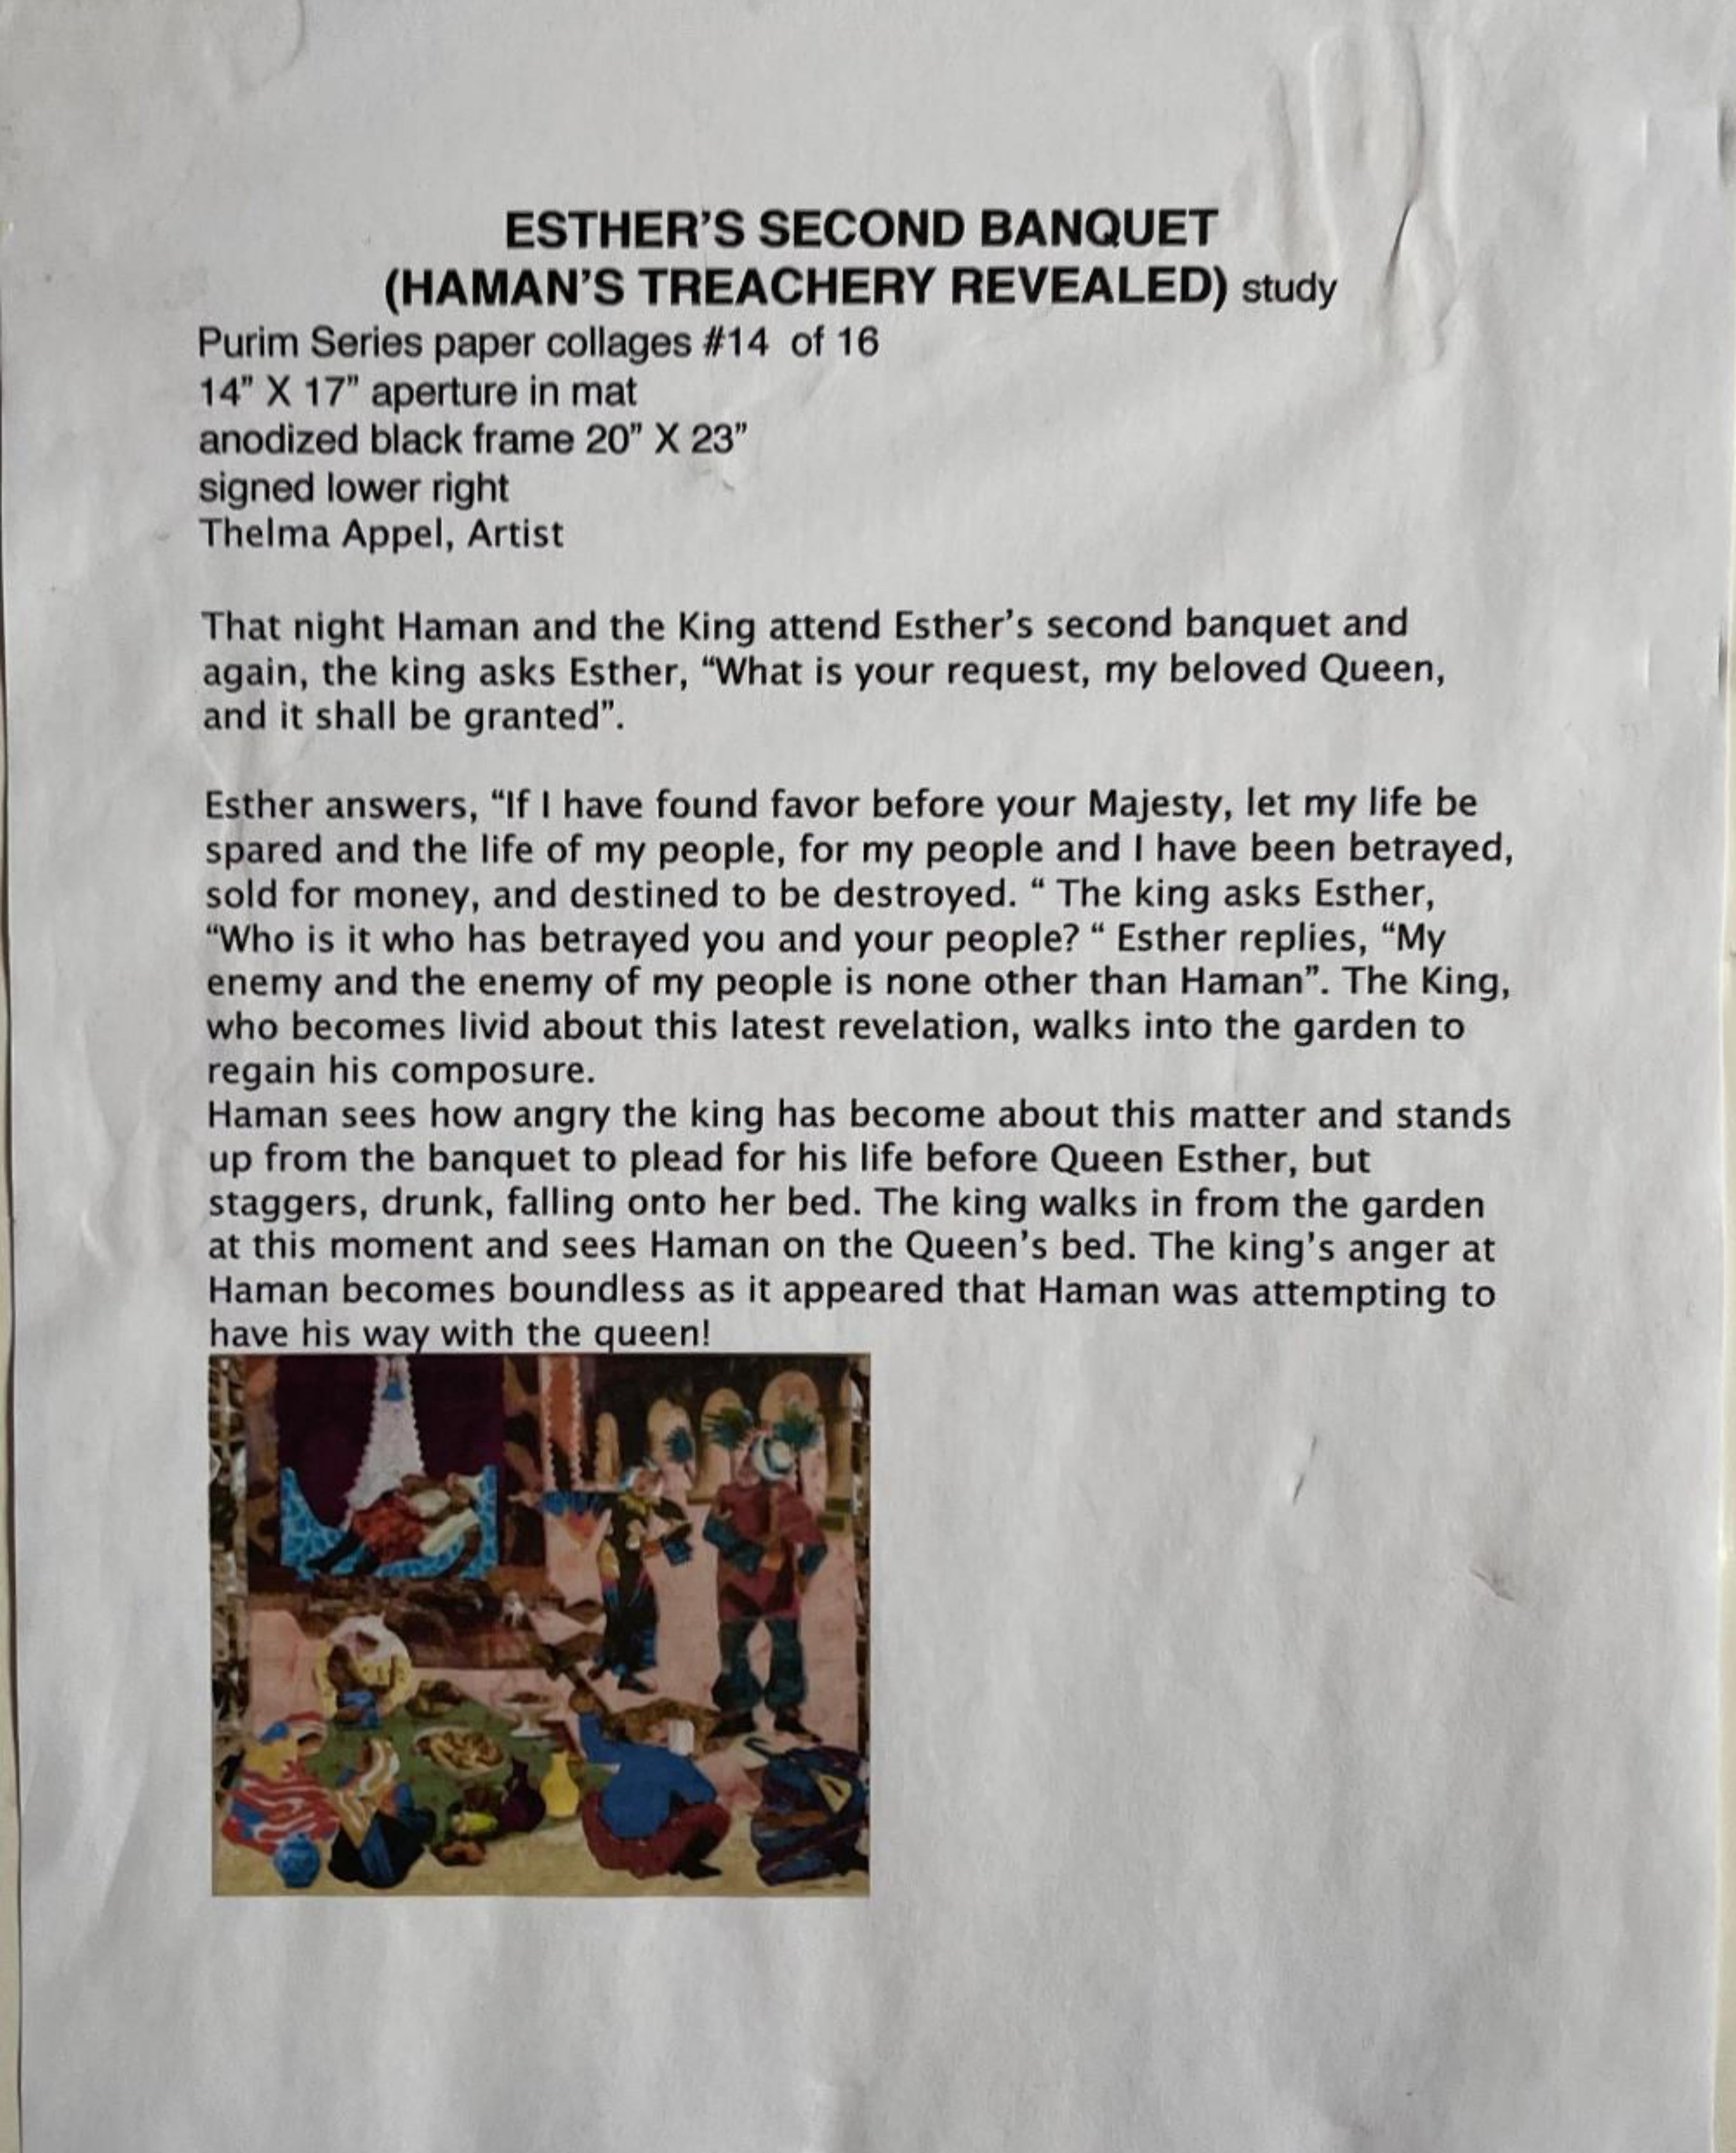 Thelma Appel
Esther's Second Banquet (Haman's Treachery Revealed), Purim Collage #14, ca. 2017
Hand made paper collage on paper
Hand signed on the front; also is accompanying by handwritten text by the artist and a typed narrative
14 × 17